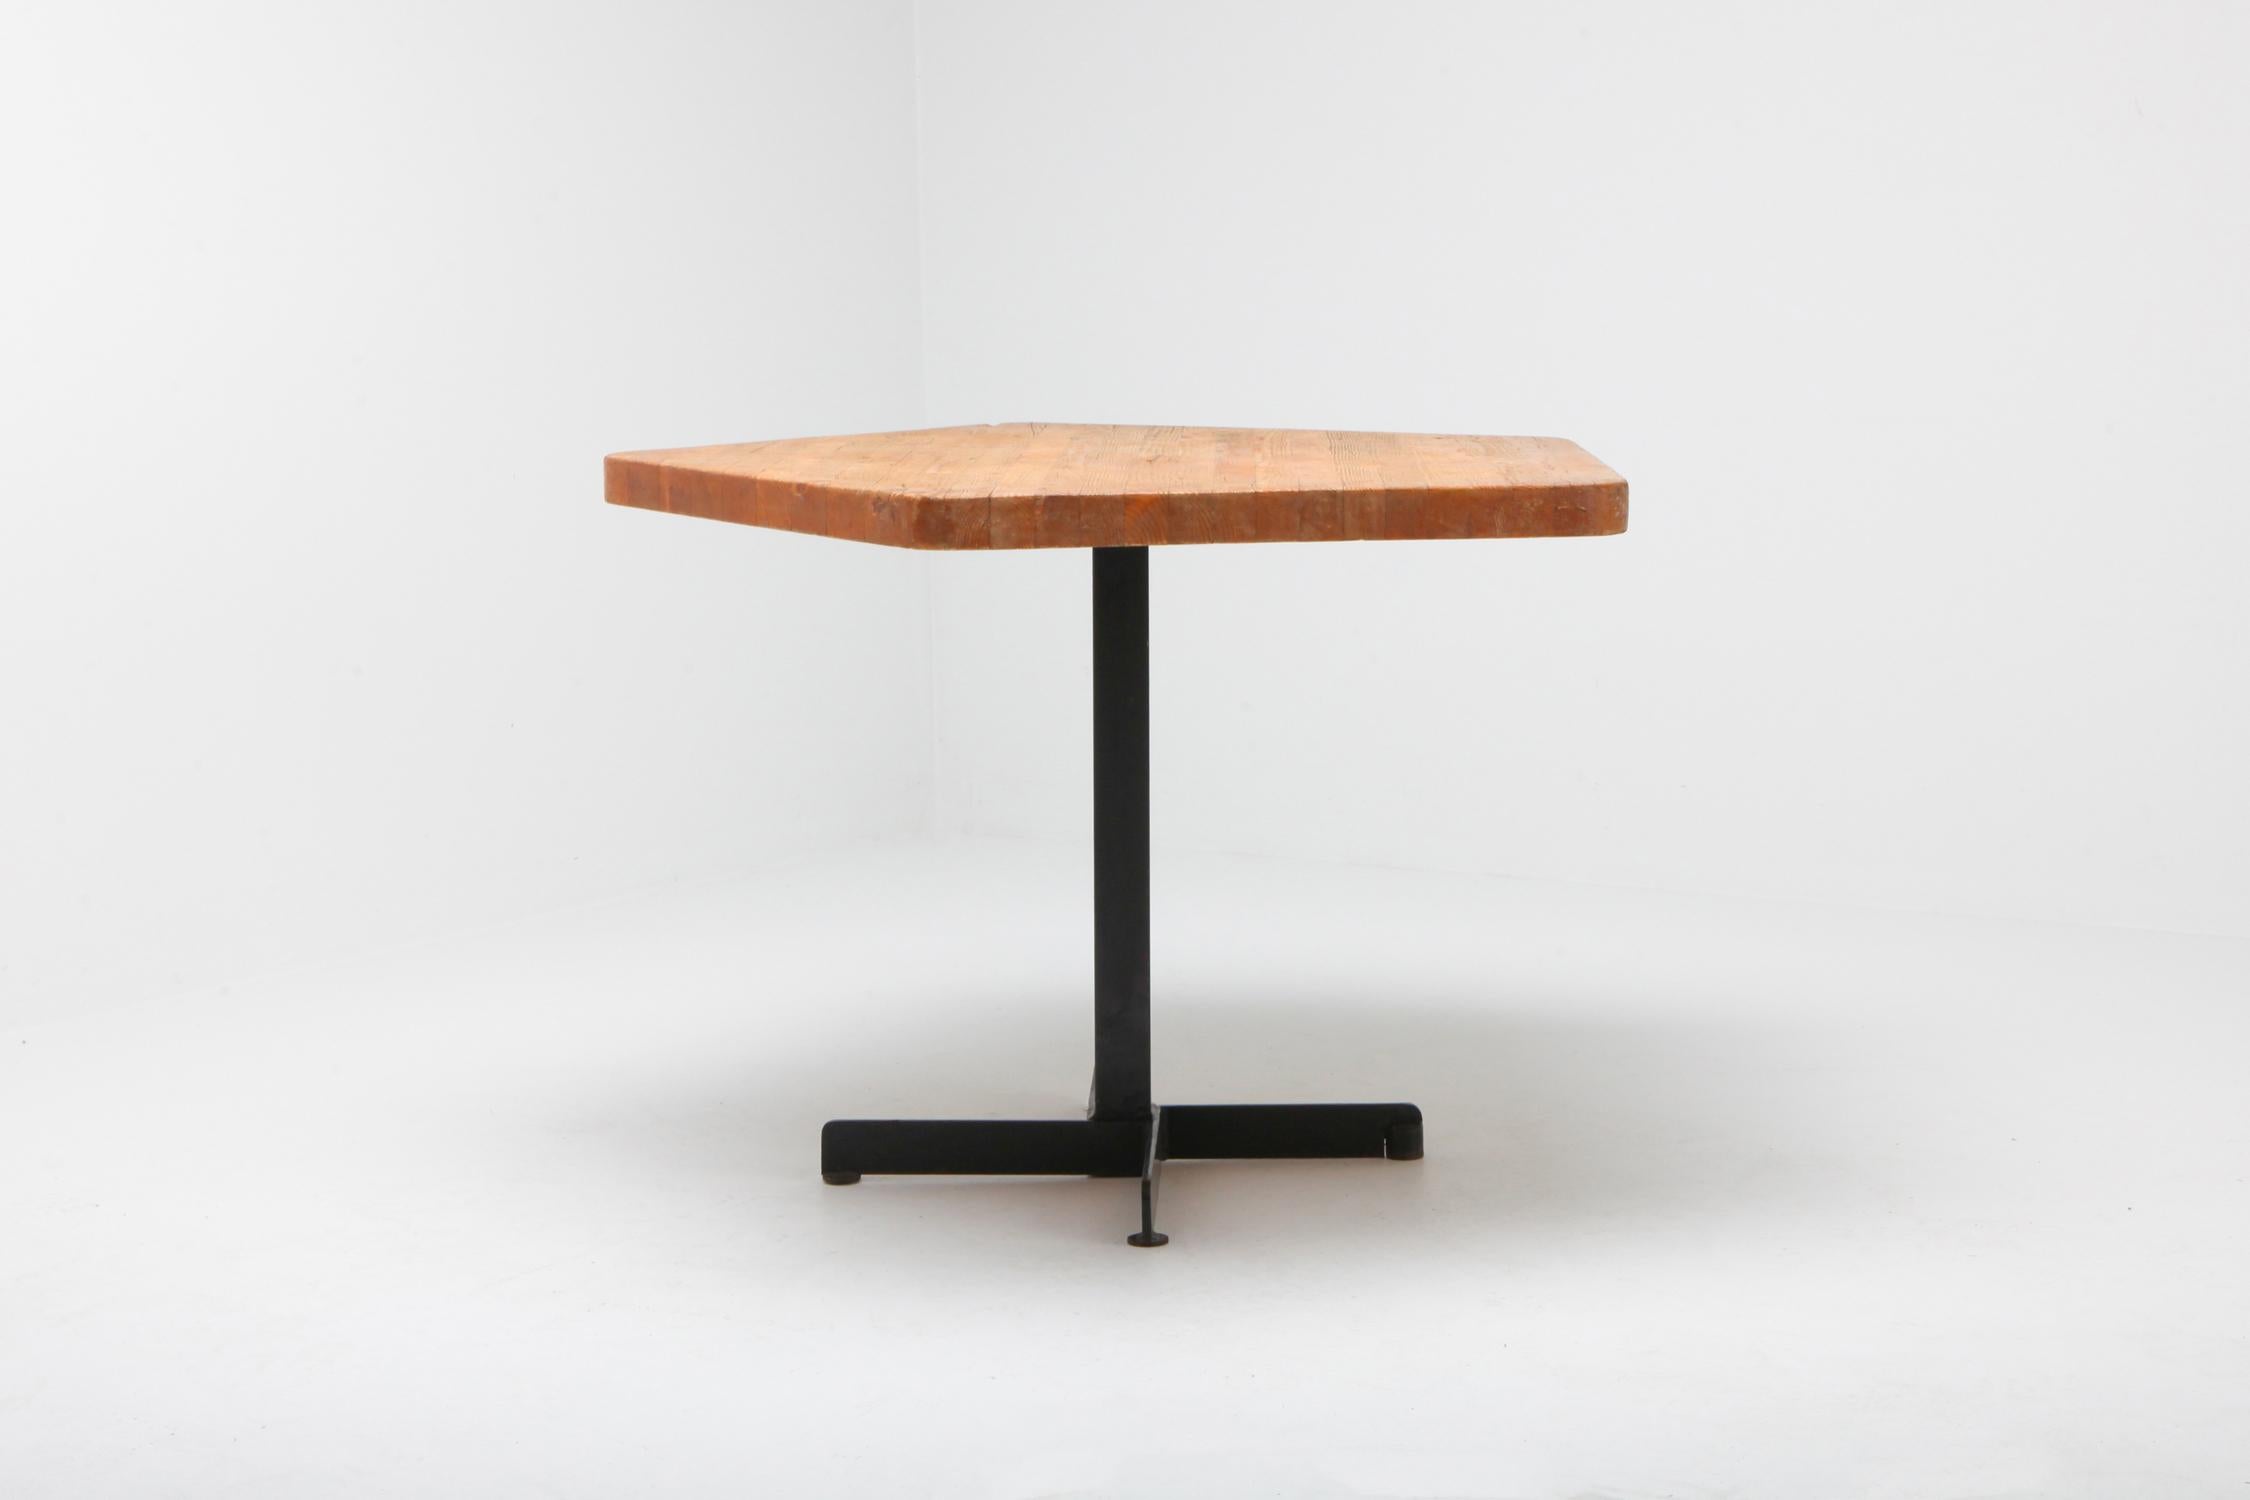 'Les Arcs' pentagonal table by Charlotte Perriand, France, 1960s.

Mid-Century Modern dining / breakfast table by Charlotte Perriand. It has a pentagonal shaped pine top standing on a black metal frame. In original condition with beautiful natural